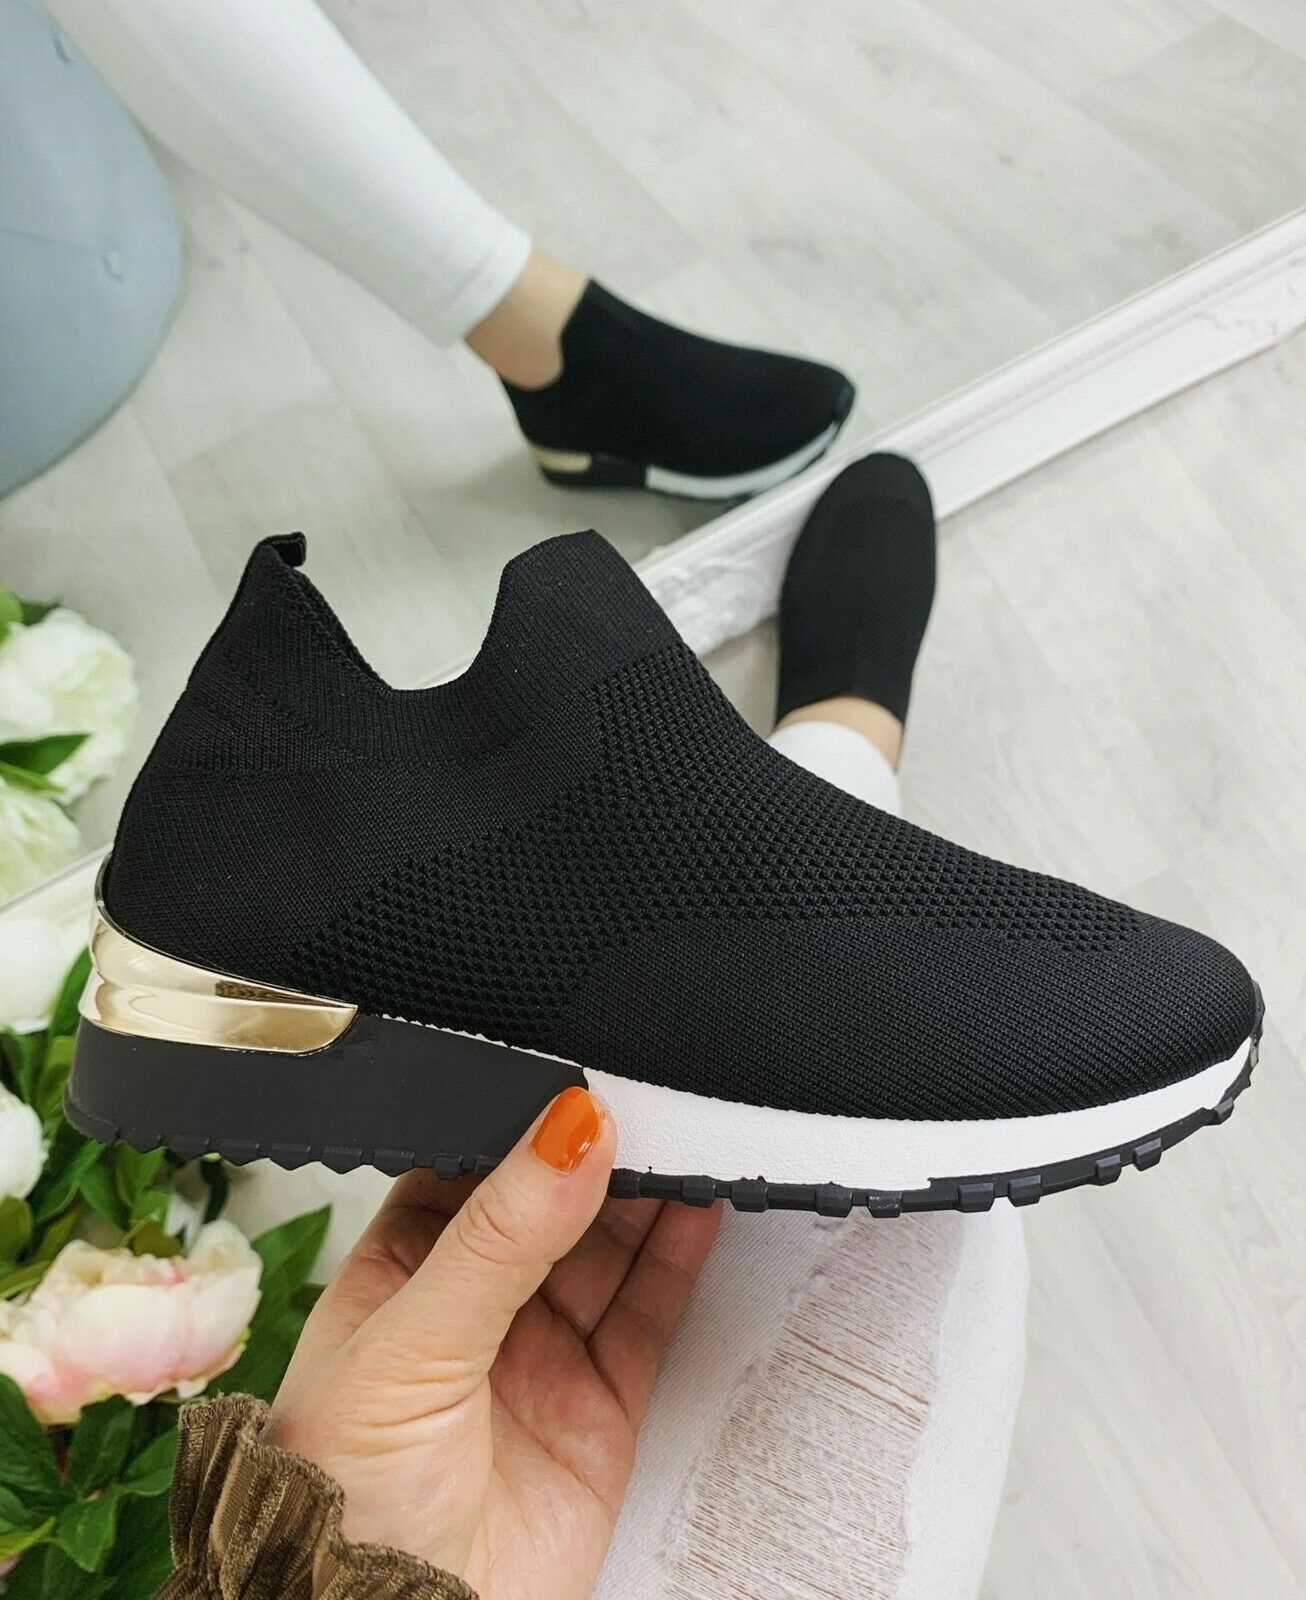 UK Size 5 EUR Size 38 Black Ladies Womens Slip on Sock Wedge Sneakers Classic Jogging Pumps Shoes Trainers